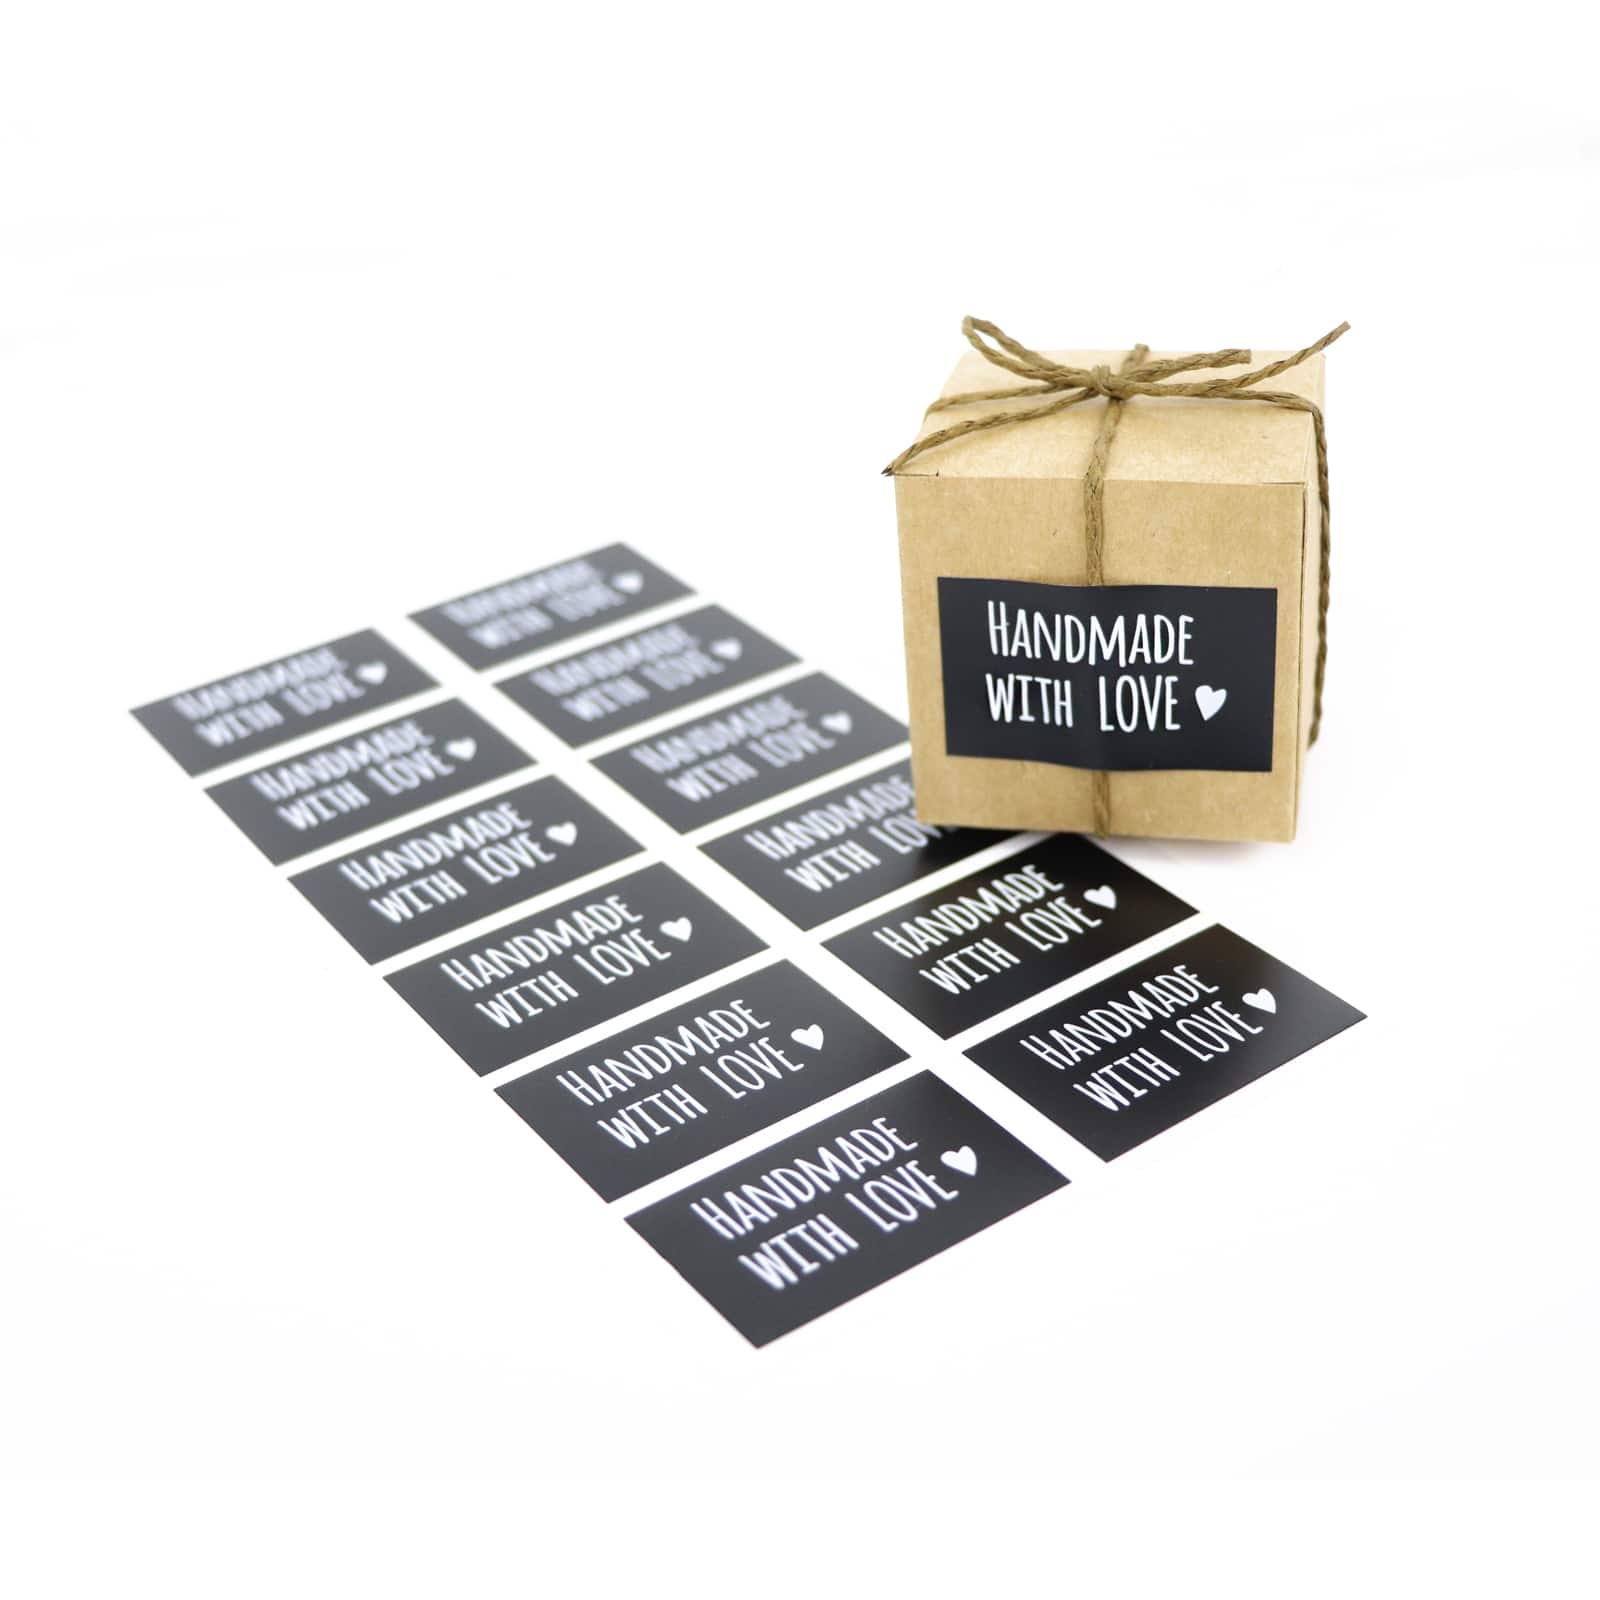 Tags for handmade items. Handmade label. DIY gift tag. Handmade stickers.  Business stickers. Made by hand with love. Packaging stickers. Printable  Tags - MasterBundles